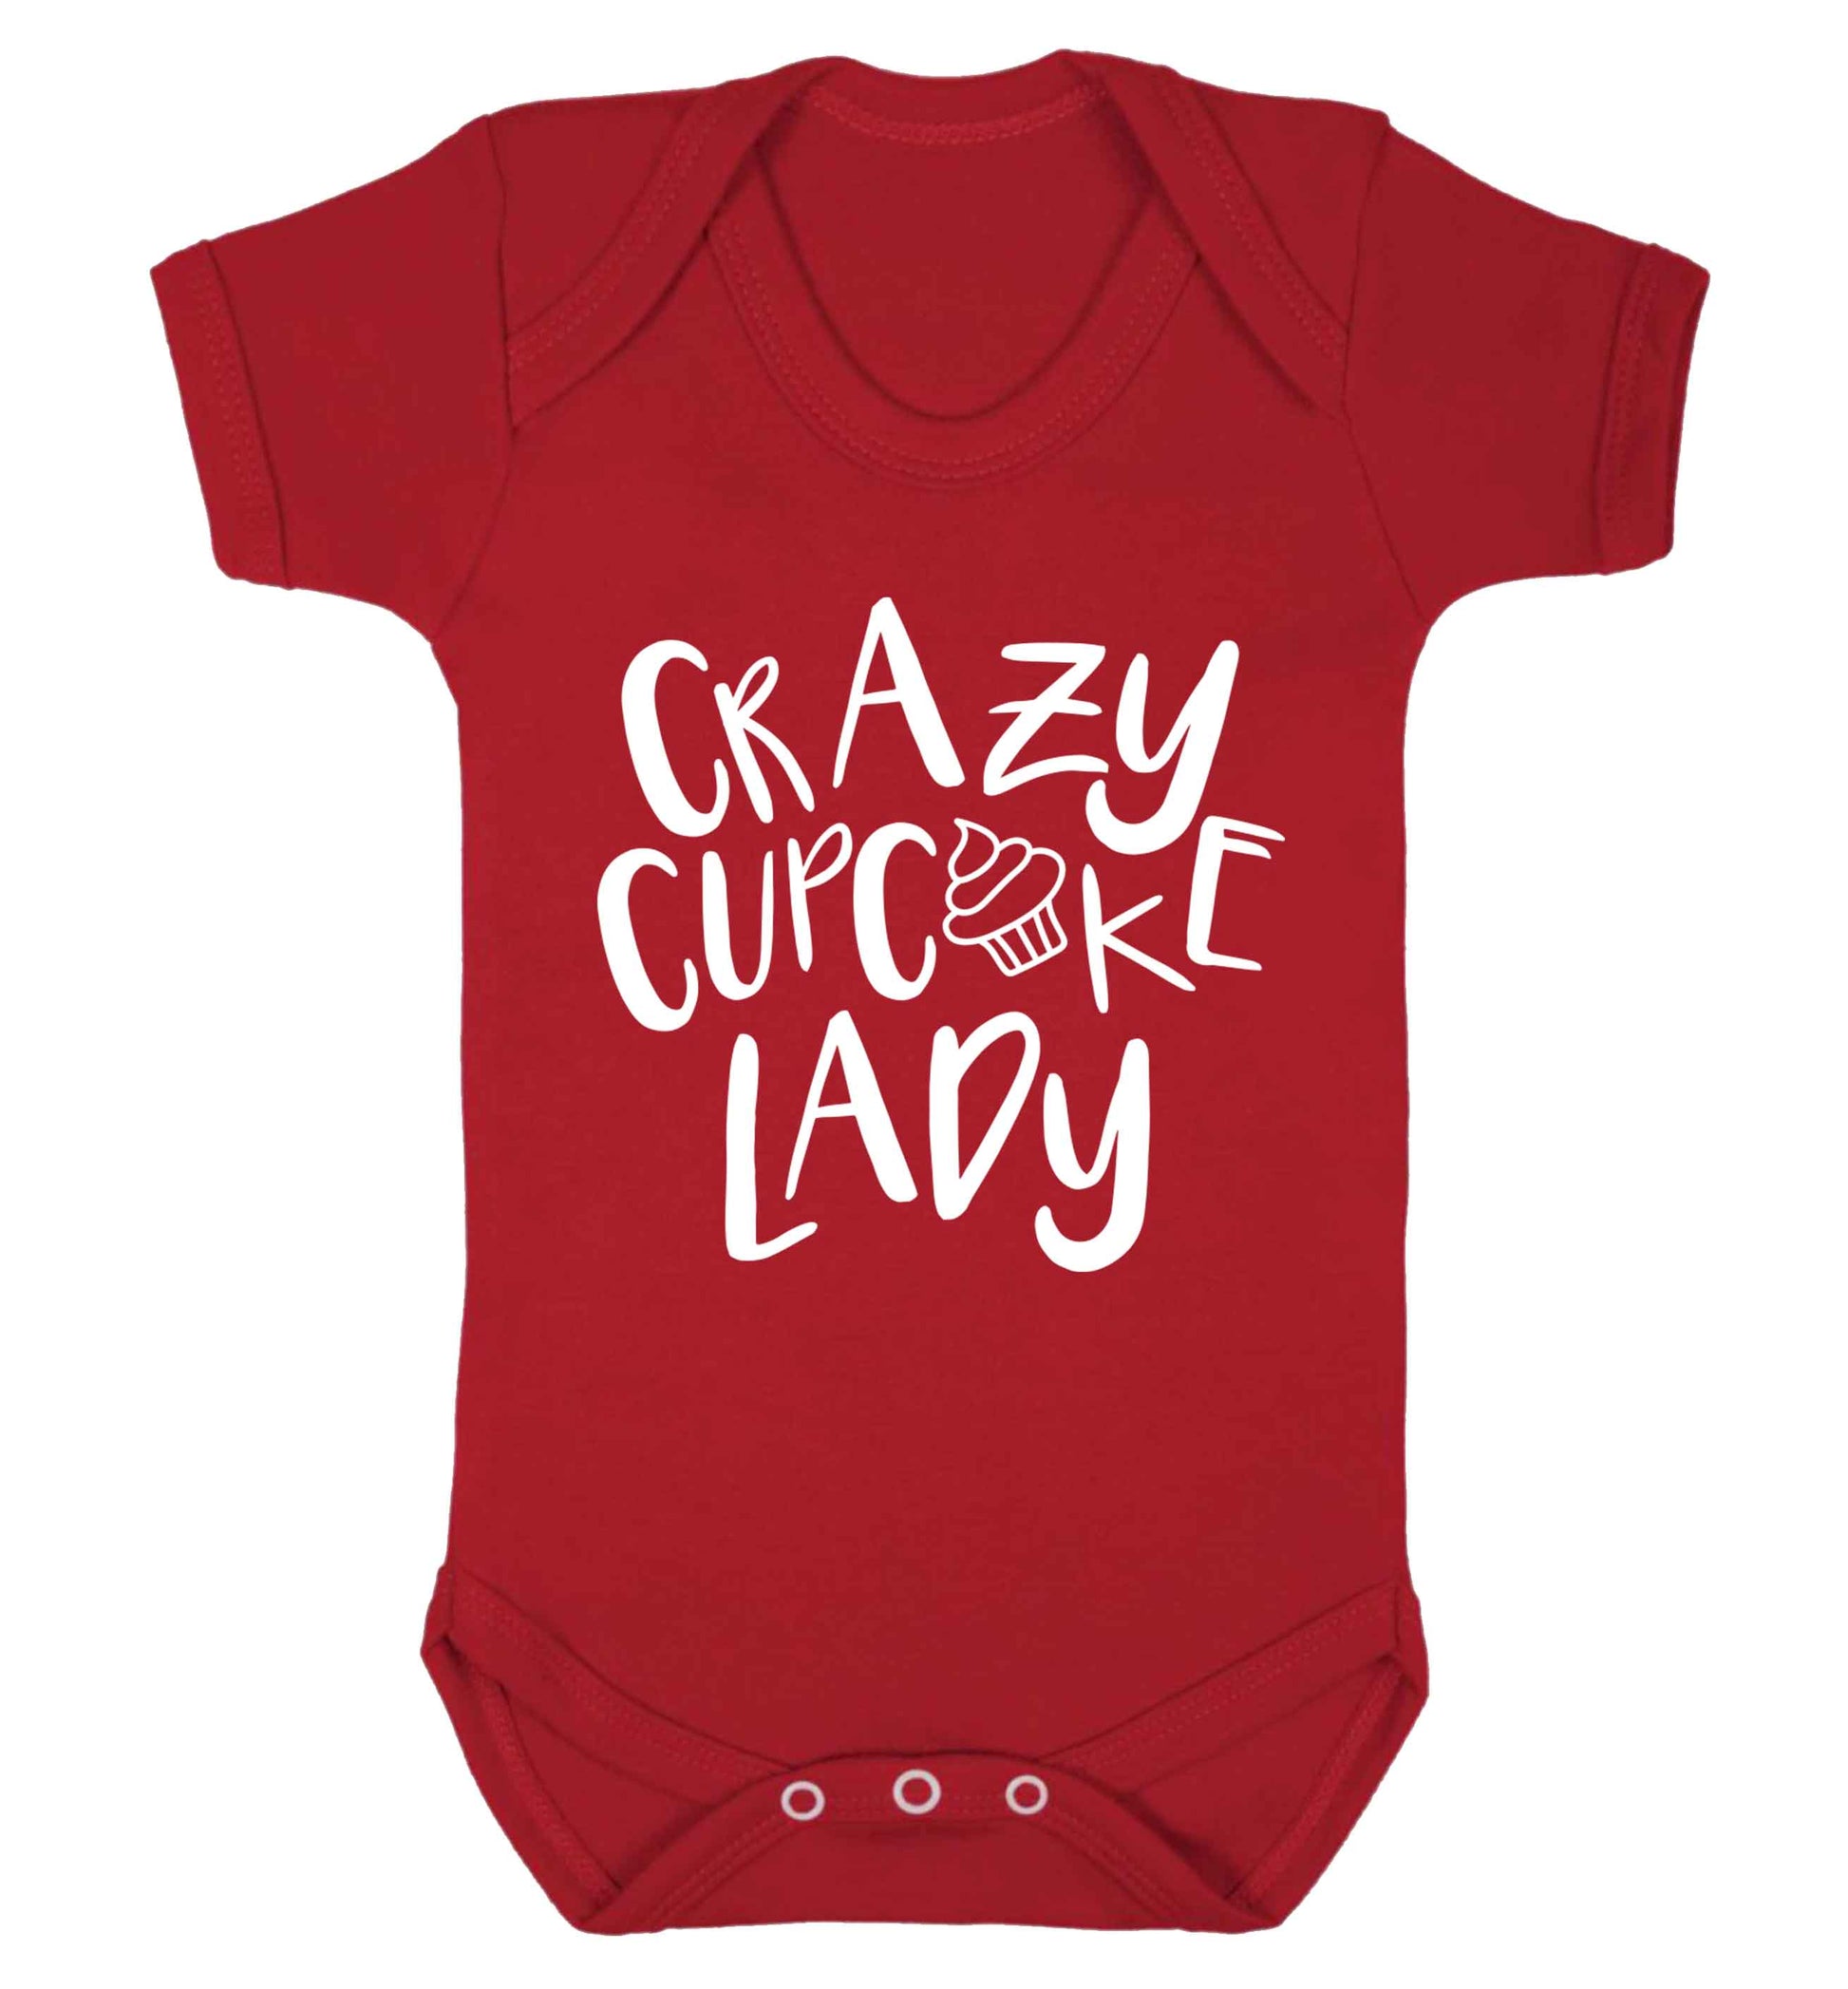 Crazy cupcake lady Baby Vest red 18-24 months